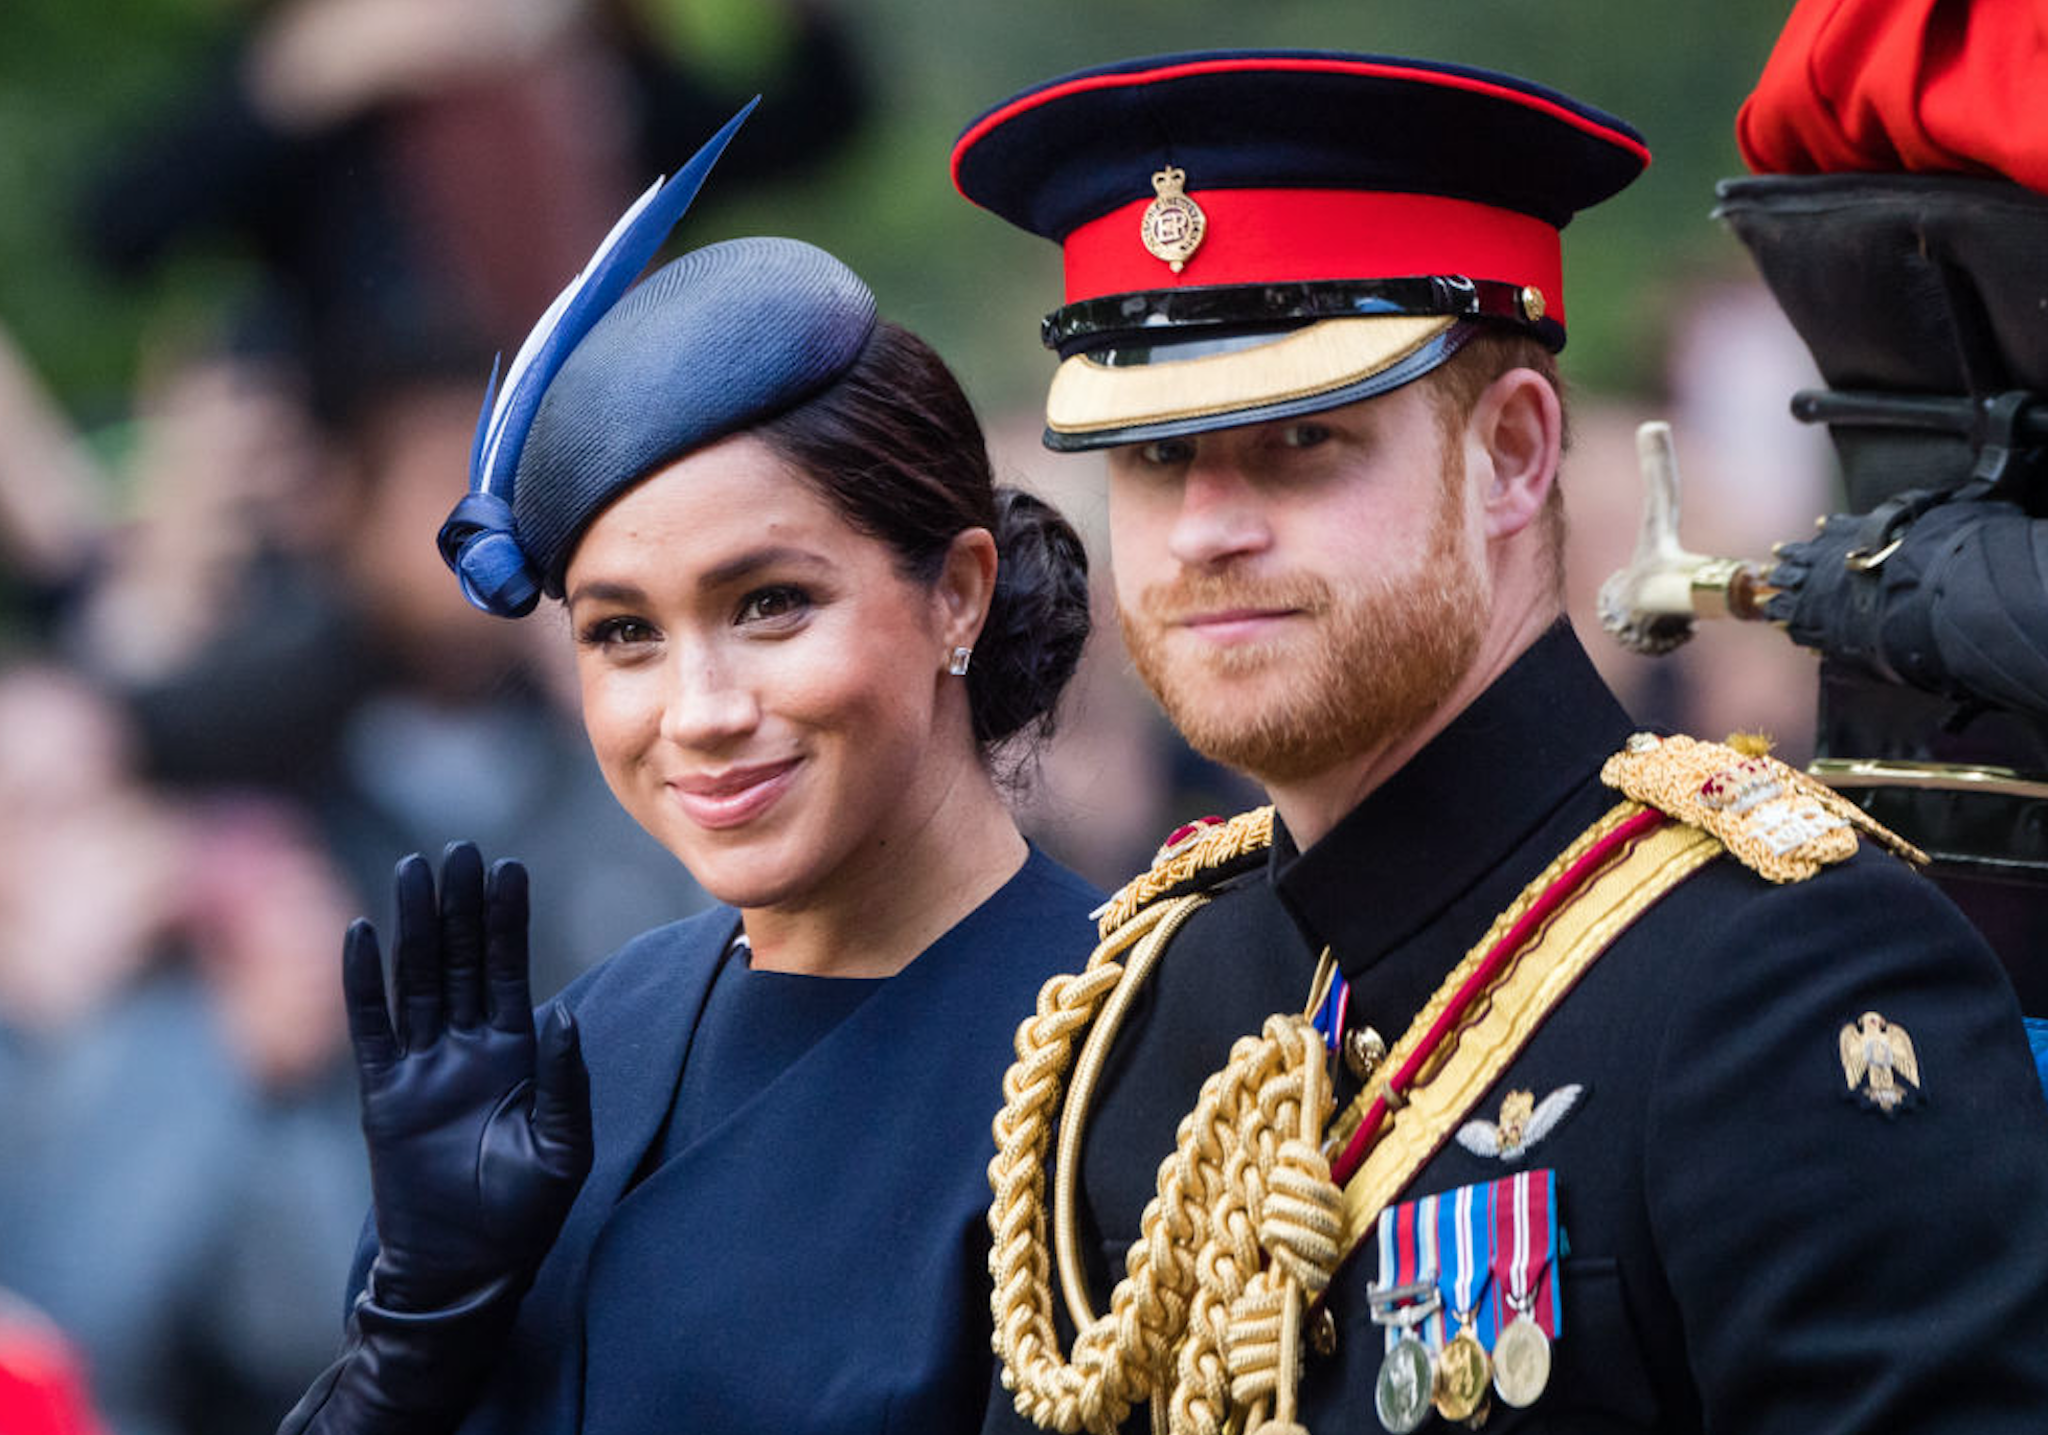 Prince Harry, Duke of Sussex and Meghan, Duchess of Sussex ride by carriage down the Mall during Trooping The Colour, the Queen's annual birthday parade, on June 08, 2019 in London, England.